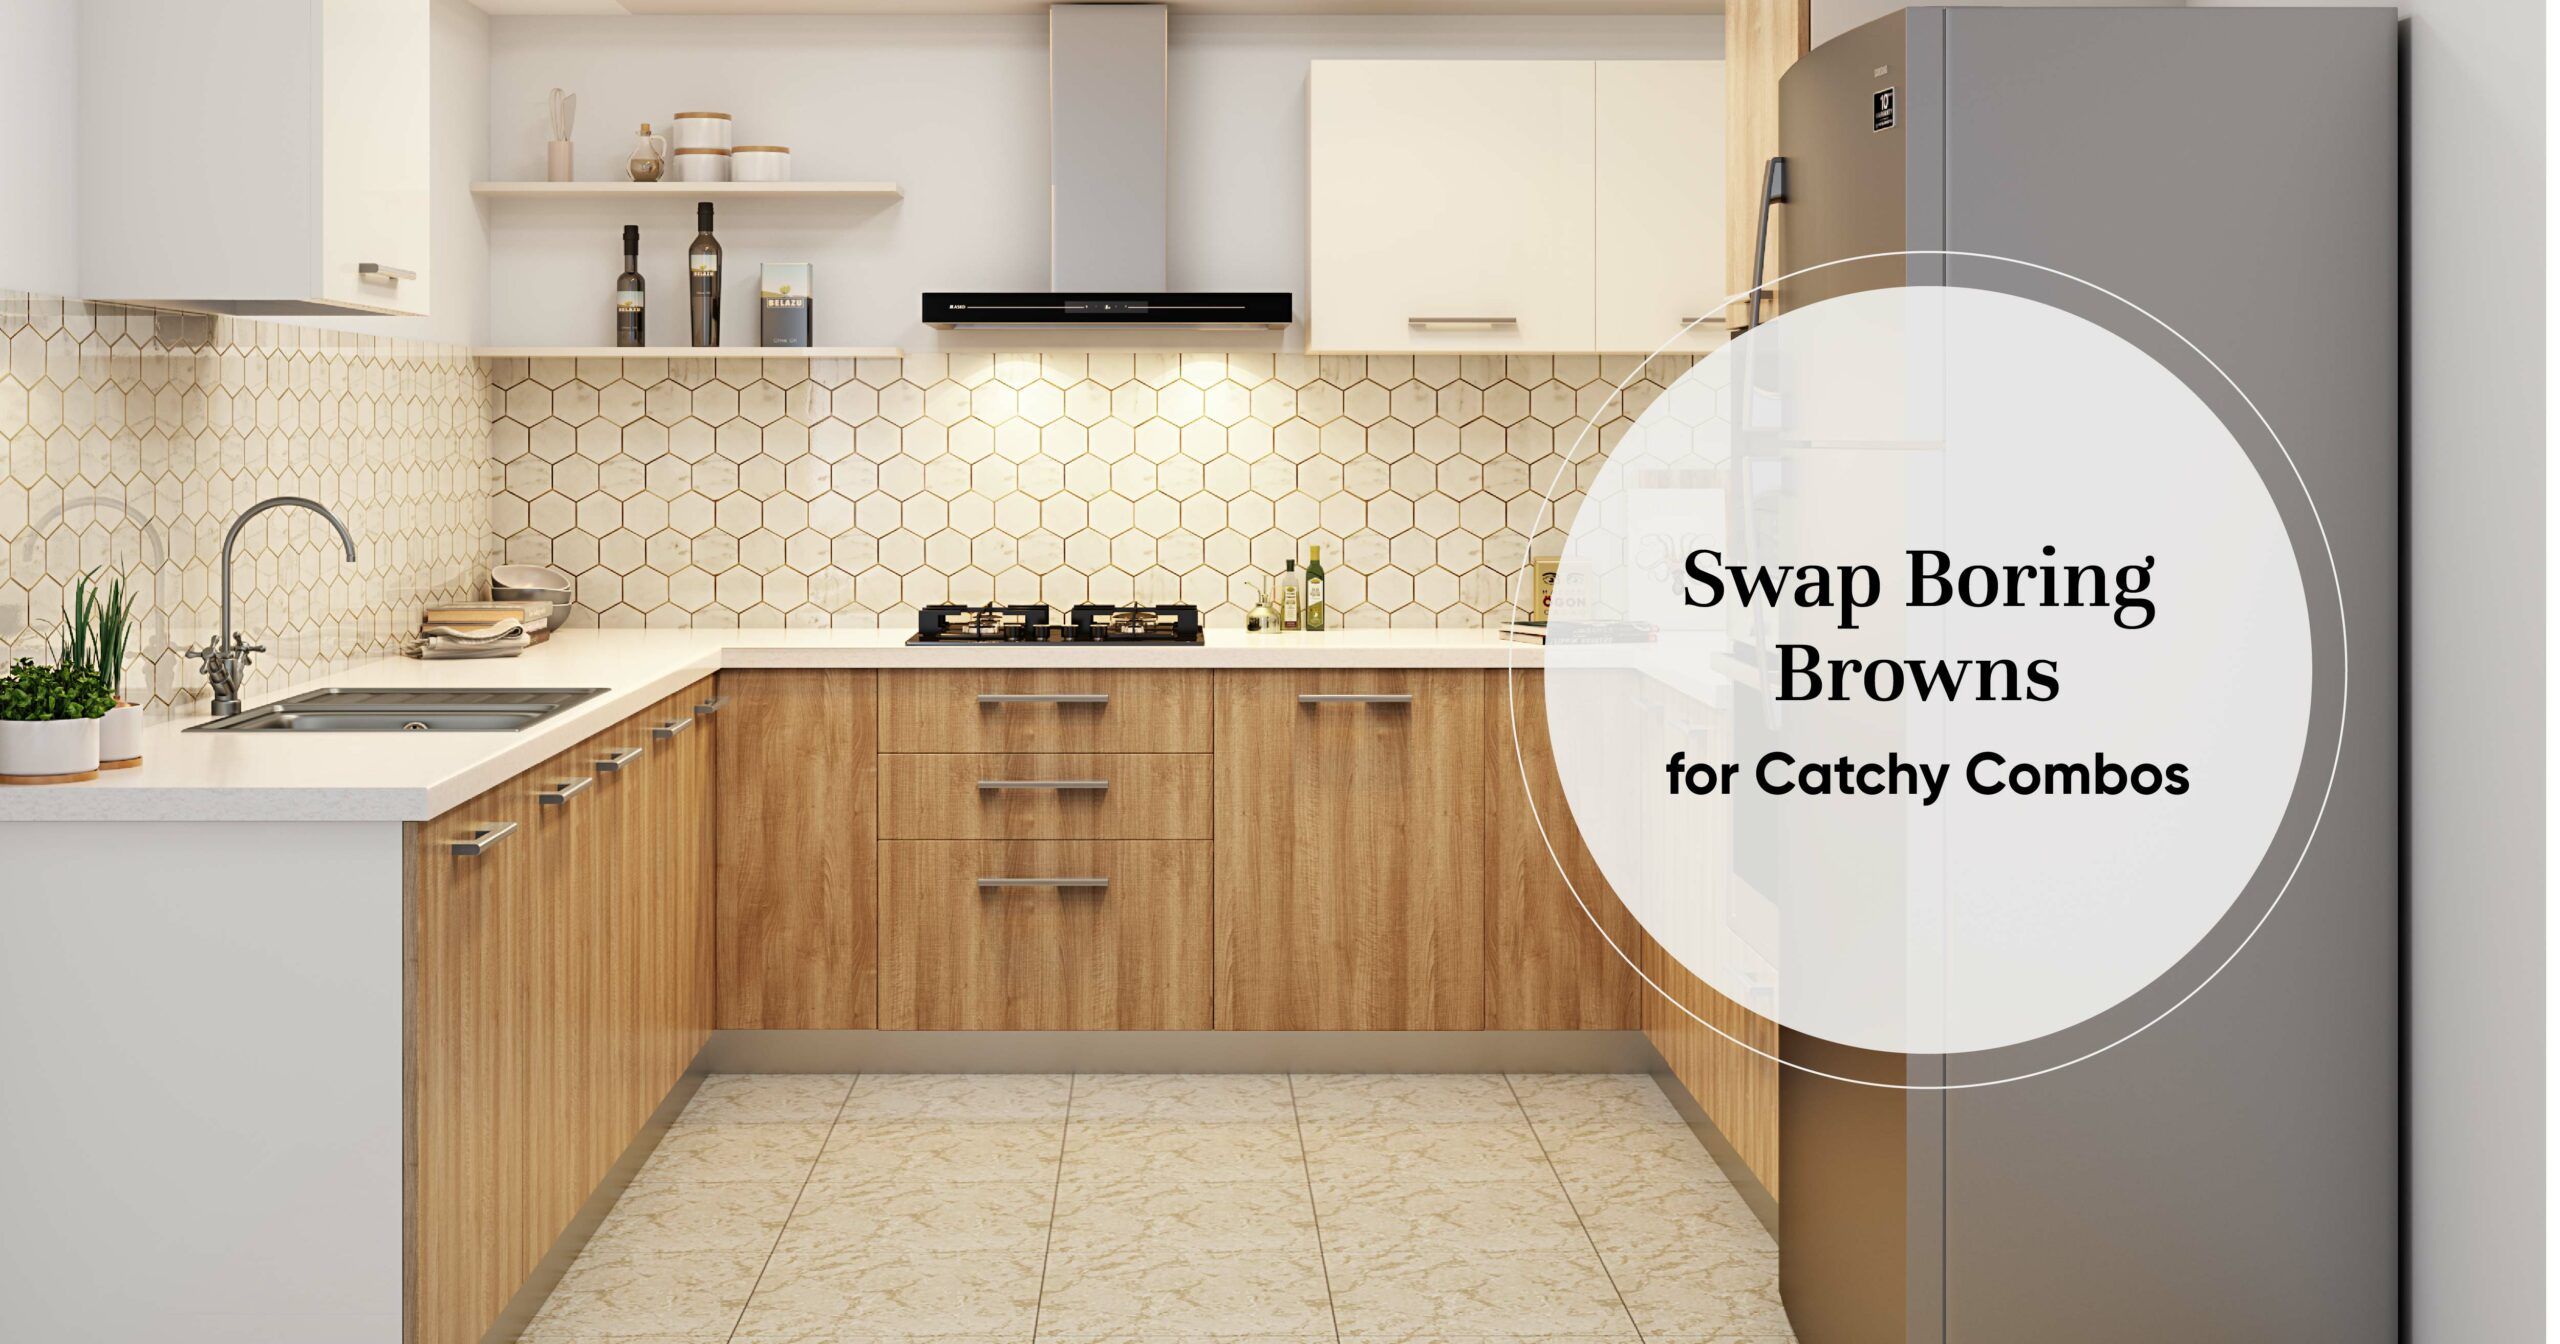 Colour Pairs Best With Brown Kitchens, Tiles Color Combination For Kitchen